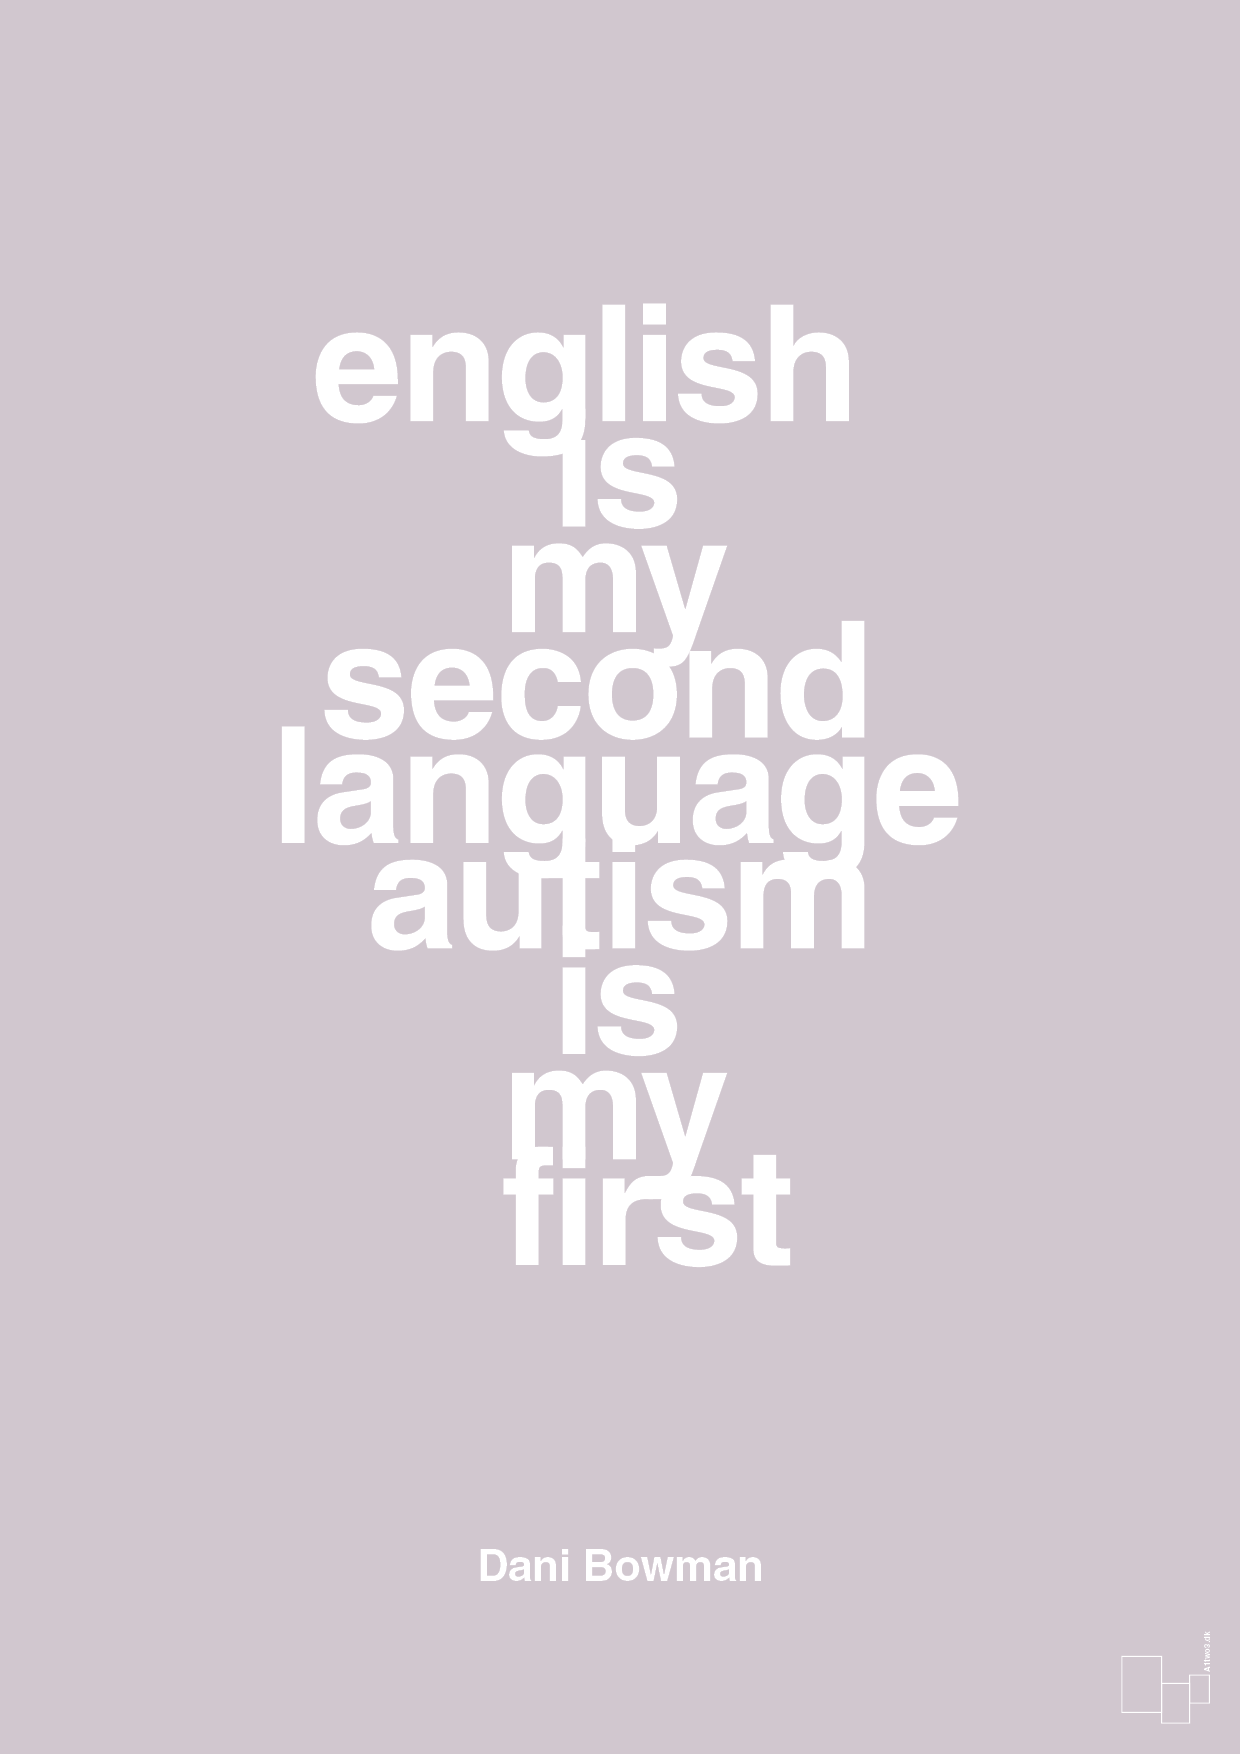 english is my second language autism is my first - Plakat med Samfund i Dusty Lilac